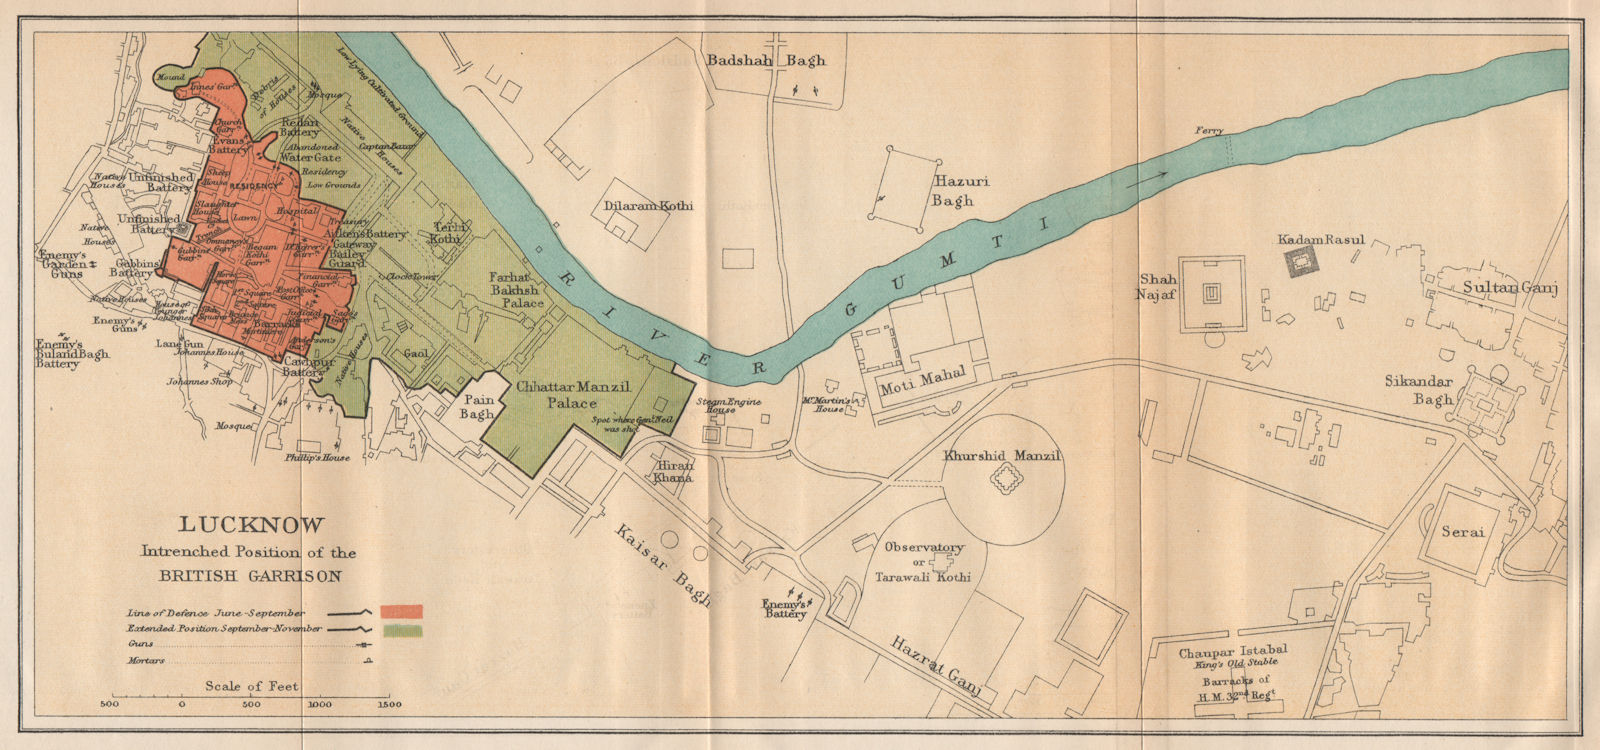 SIEGE OF LUCKNOW.showing British Garrison positions.1857 Indian Mutiny 1929 map